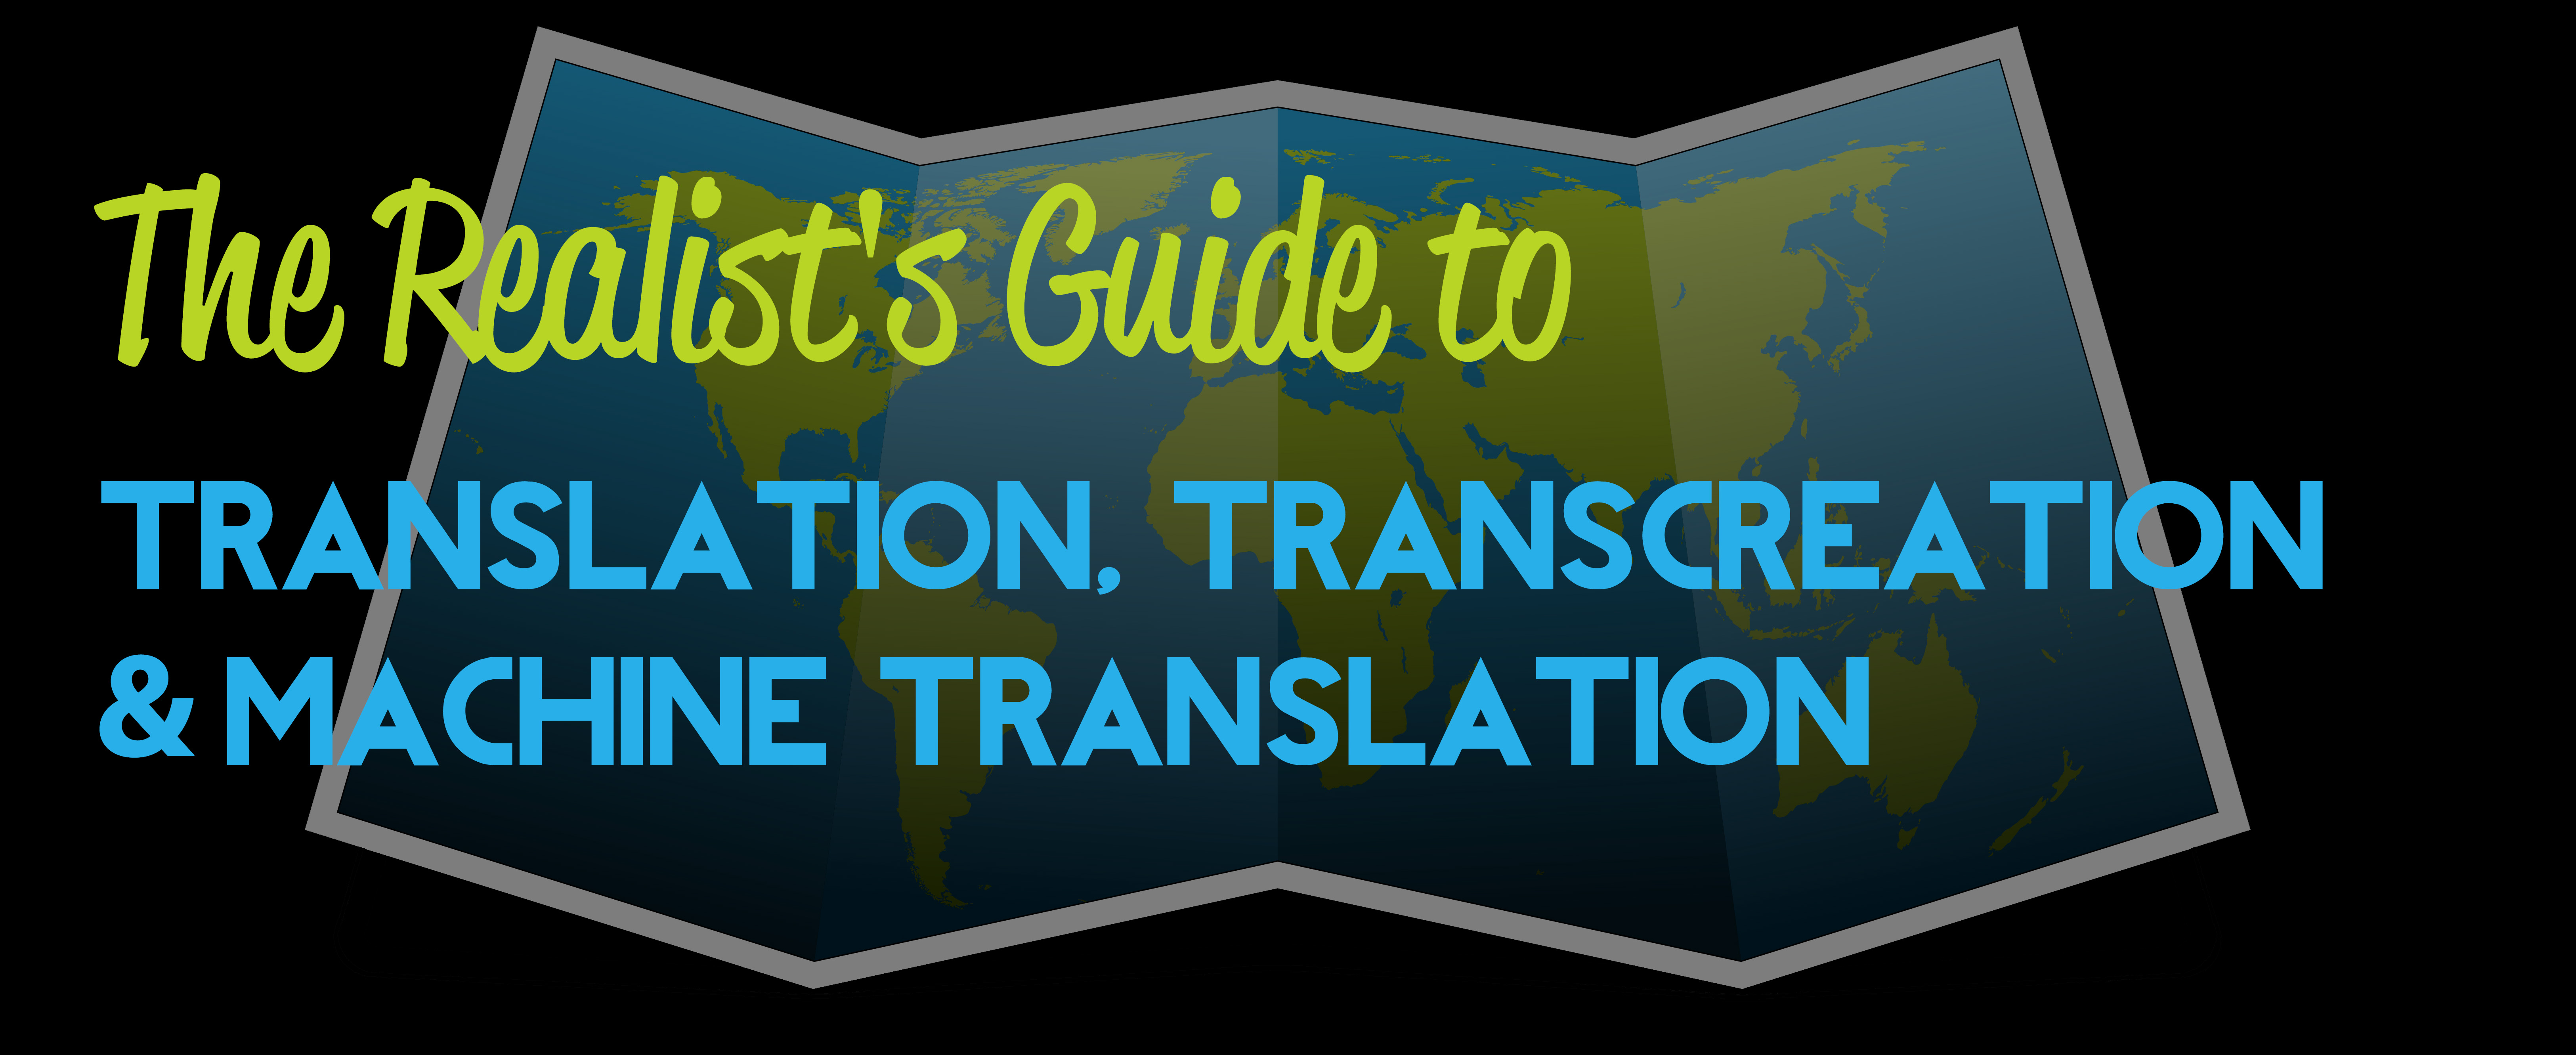 The Realist’s Guide to Translation, Transcreation and Machine Translation